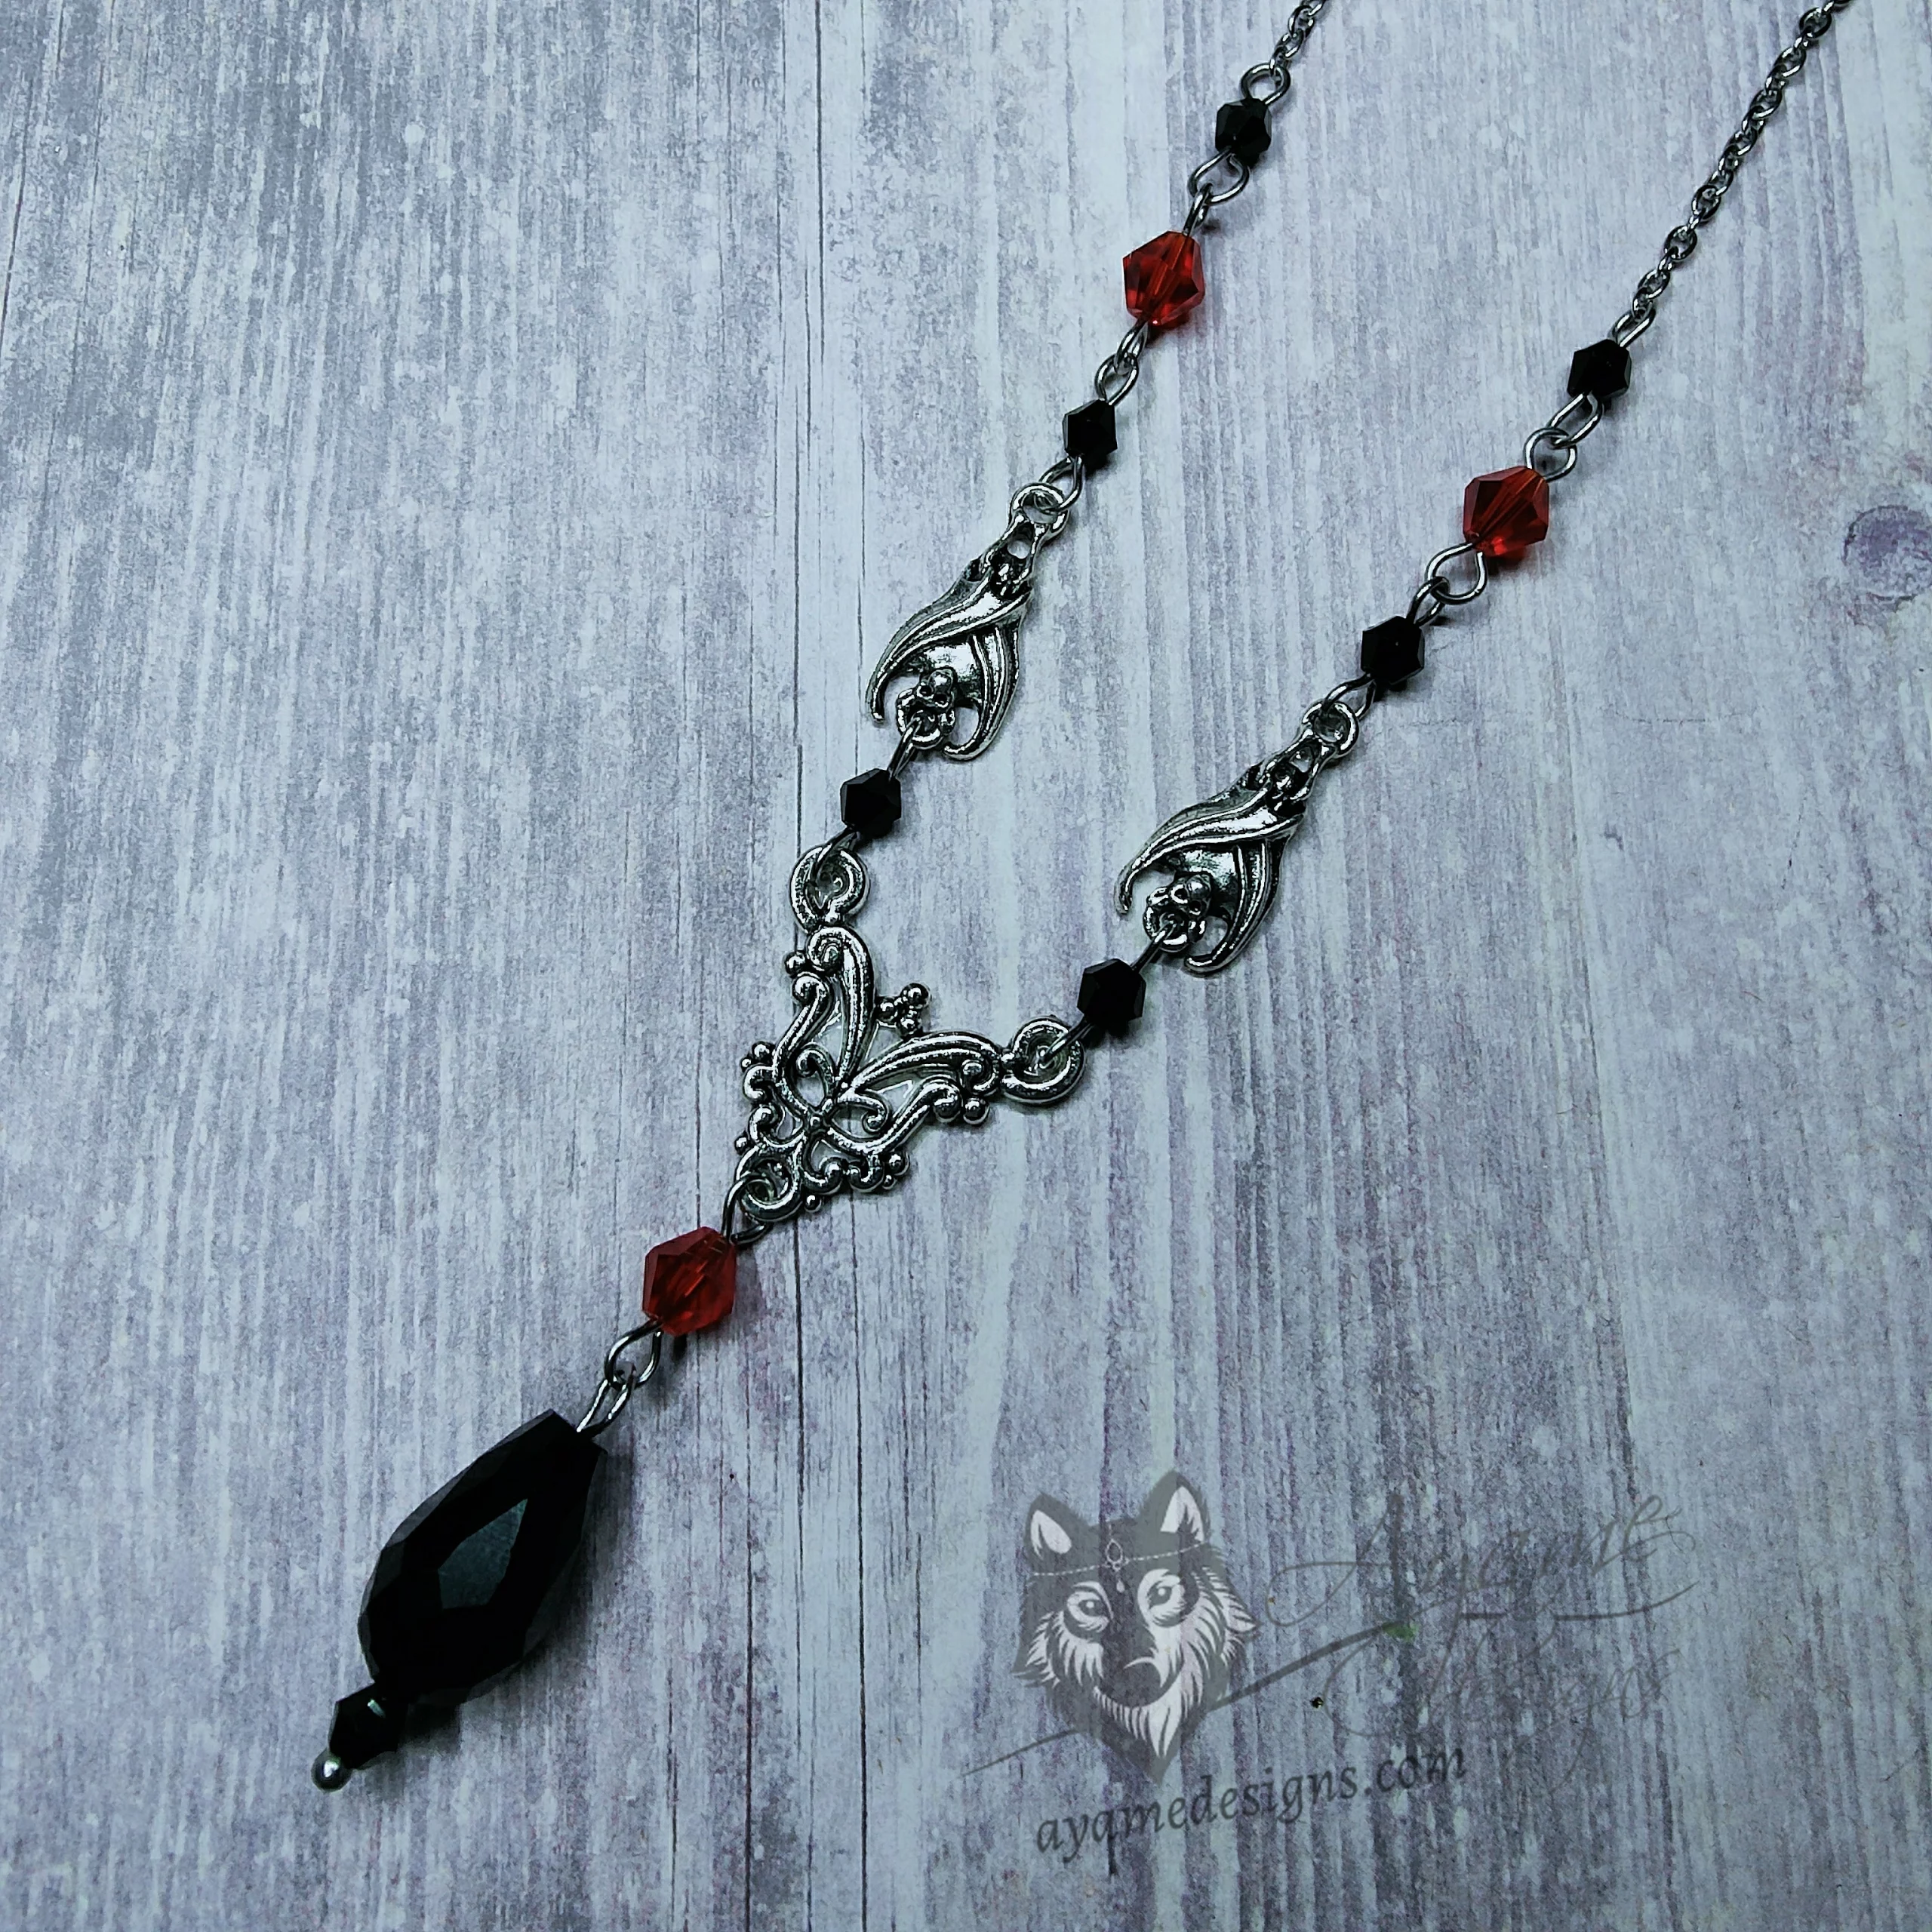 Adjustable gothic necklace with small bat and filigree charms, with black and red Austrian crystal beads and stainless steel chain